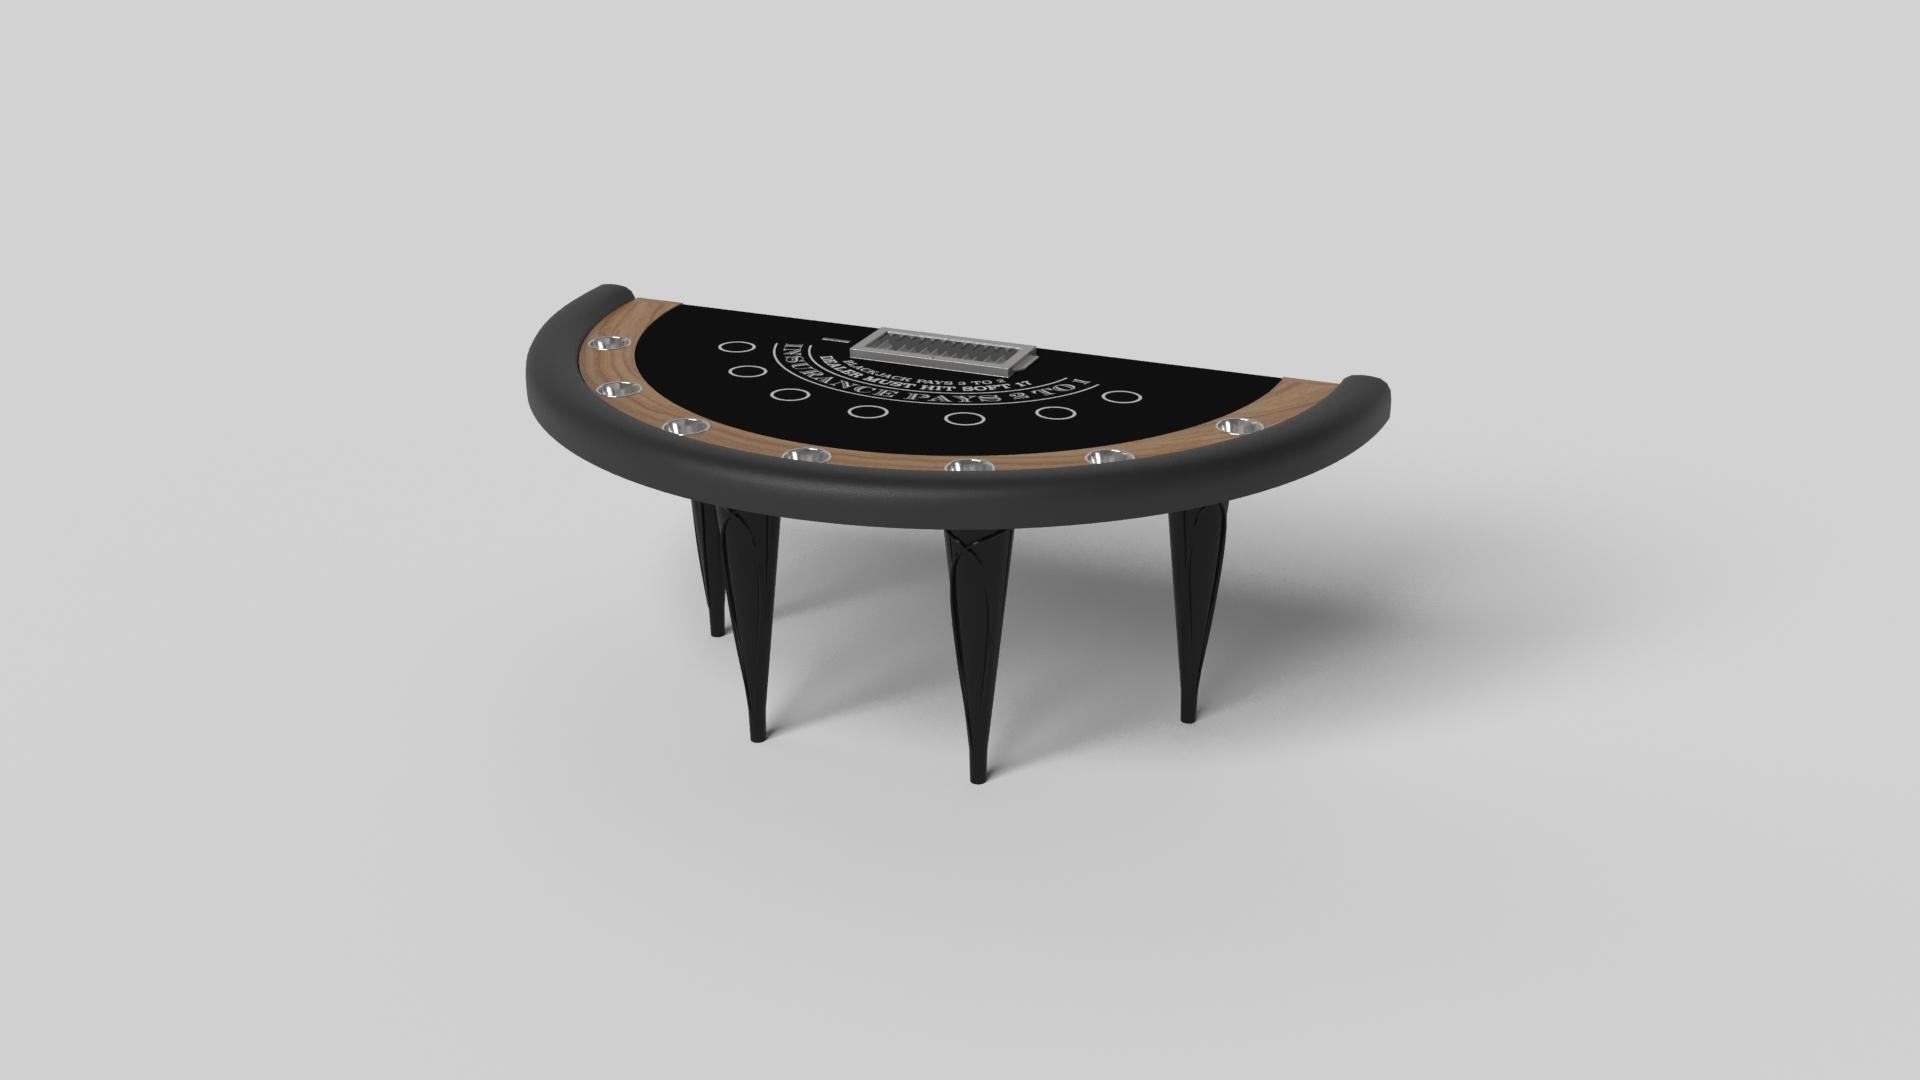 Champagne gold accents add undeniable elegance to this luxury blackjack table. Offering superior playability and uncompromised style, this design features hand carved details, decorative metal elements, and metal sabots at the bottom of each leg.